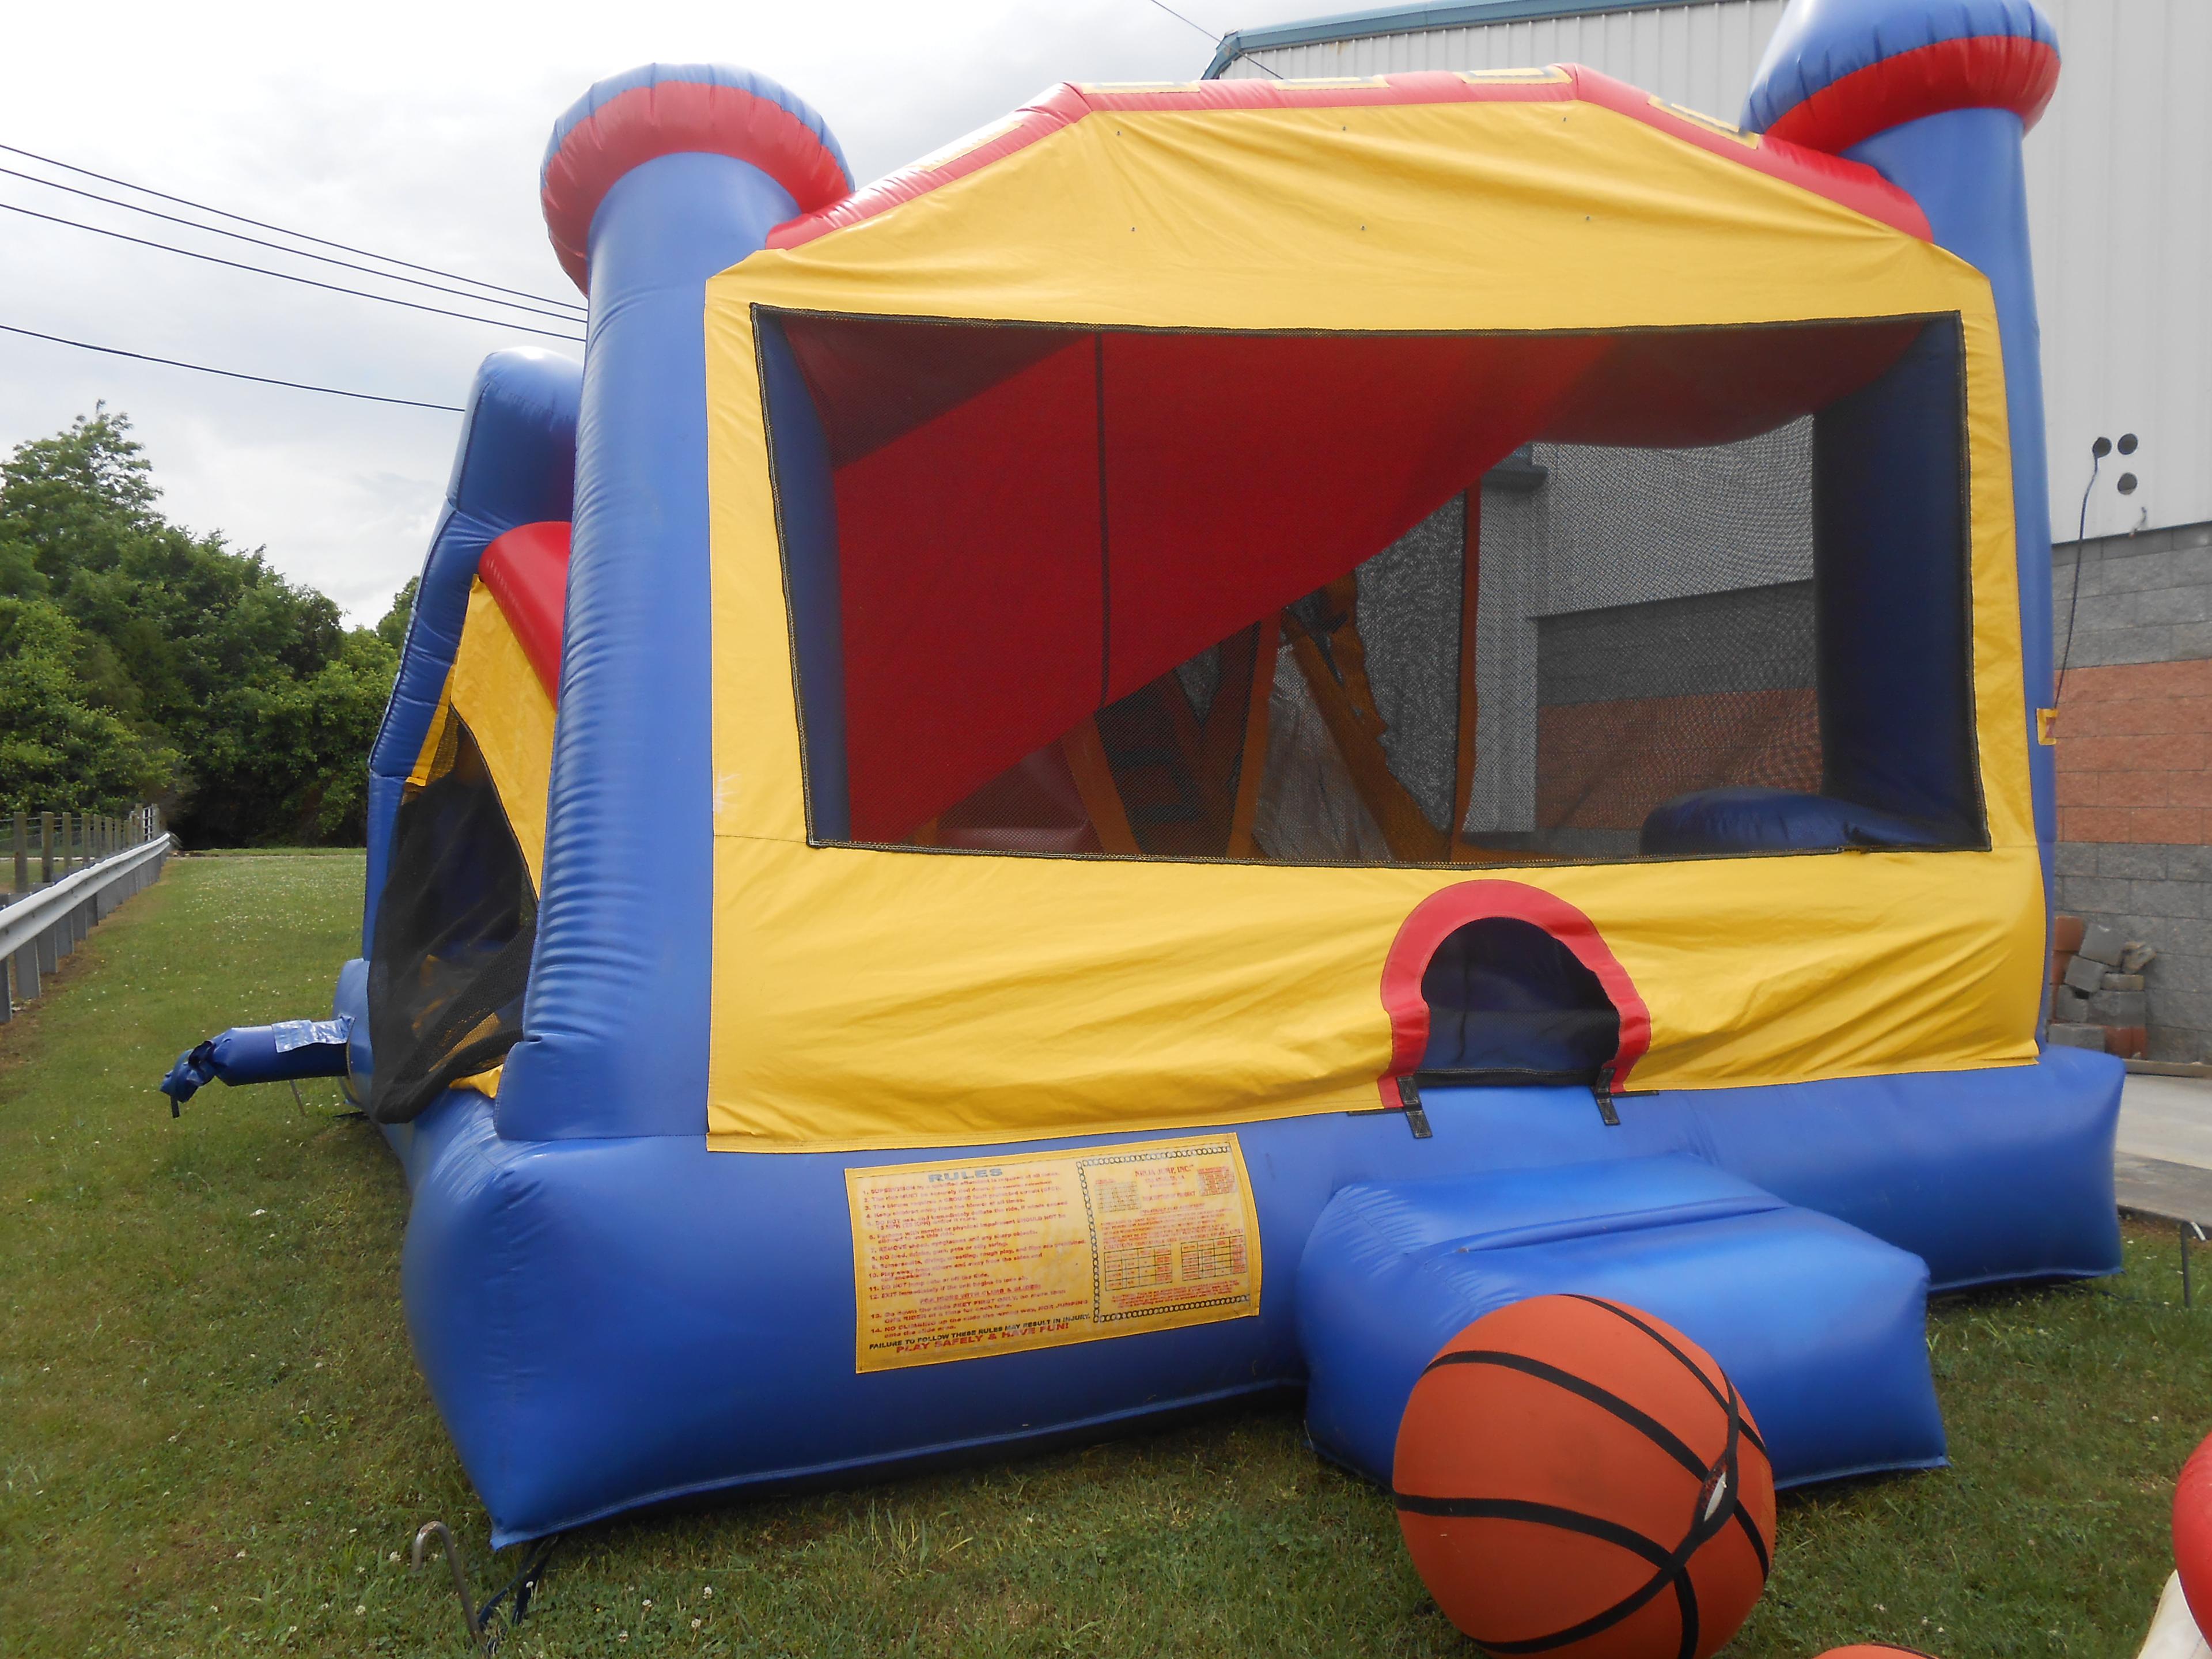 "INFLATABLE 4 IN 1 COMBO CASTLE WITH STAKES AND BLOWER